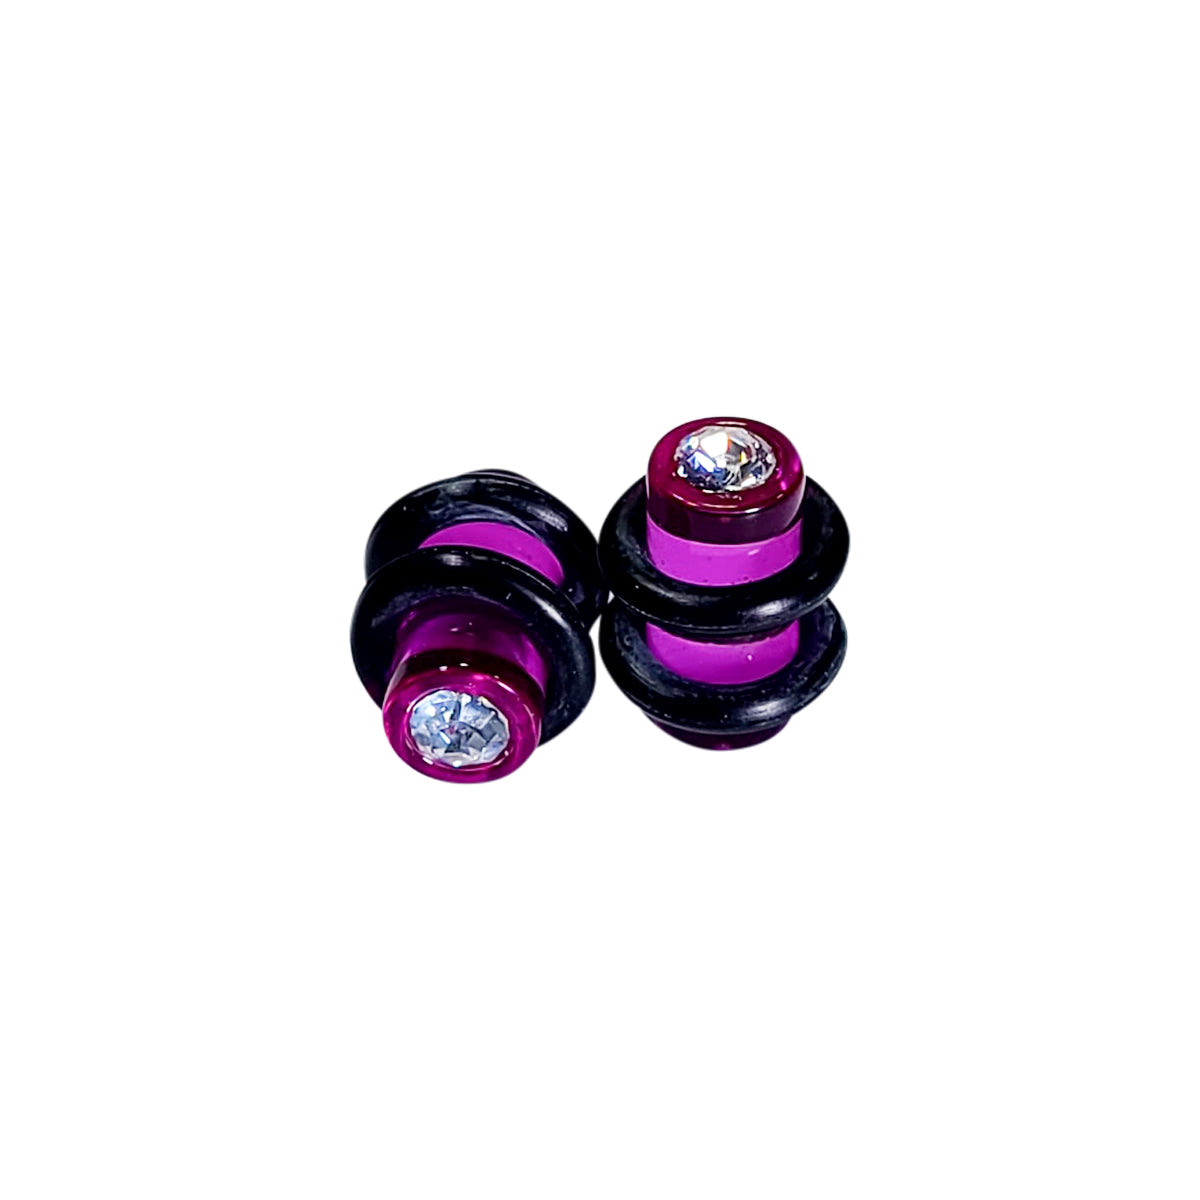 Pair of Acrylic CZ Gem Jeweled Oring Ear Plugs - 5 Colors Available